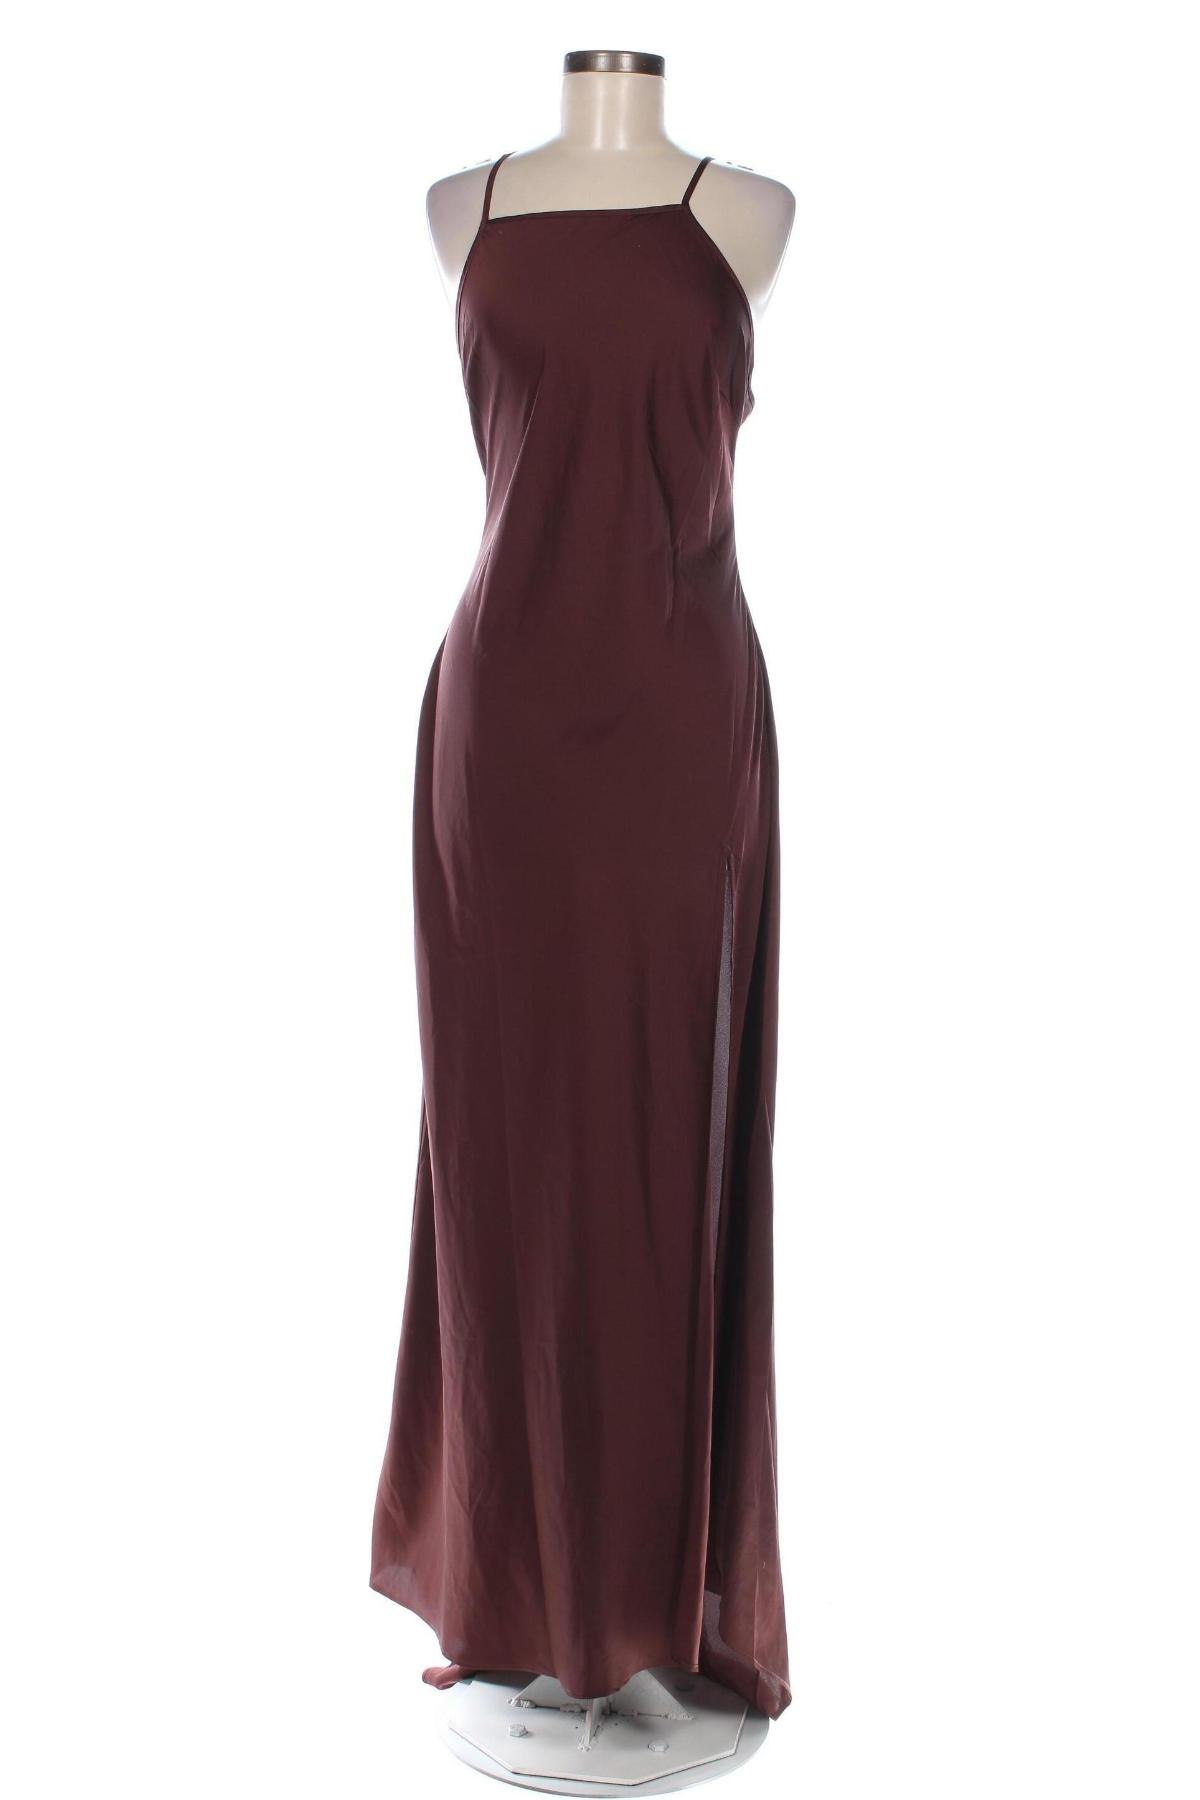 Kleid Guido Maria Kretschmer for About You, Größe L, Farbe Rot, Preis € 43,30